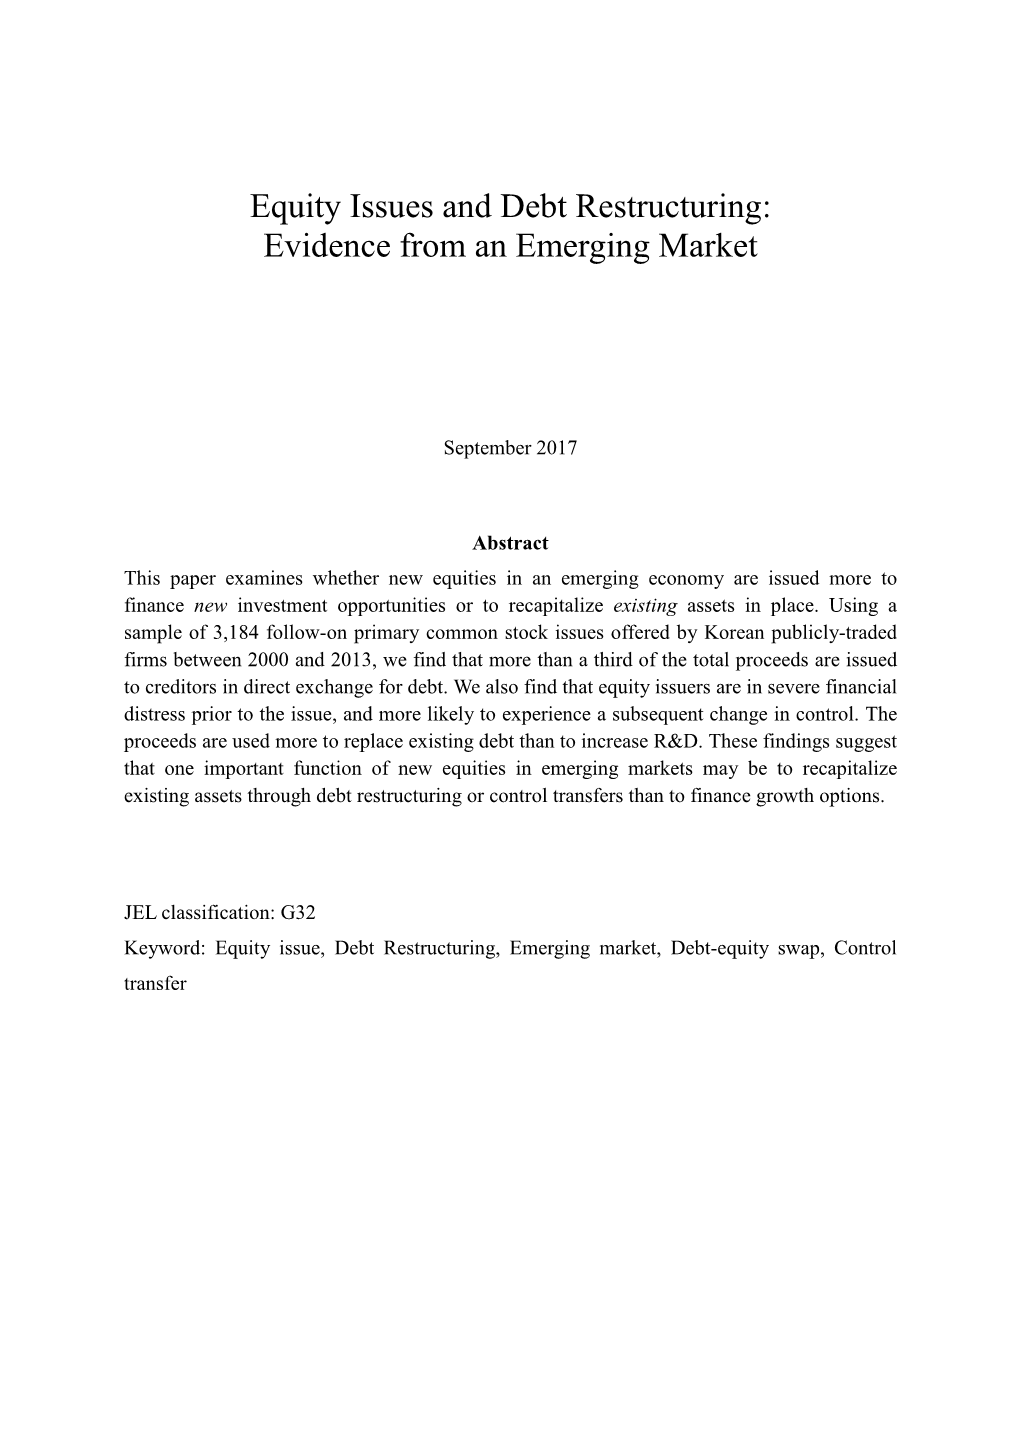 Equity Issues and Debt Restructuring: Evidence from an Emerging Market